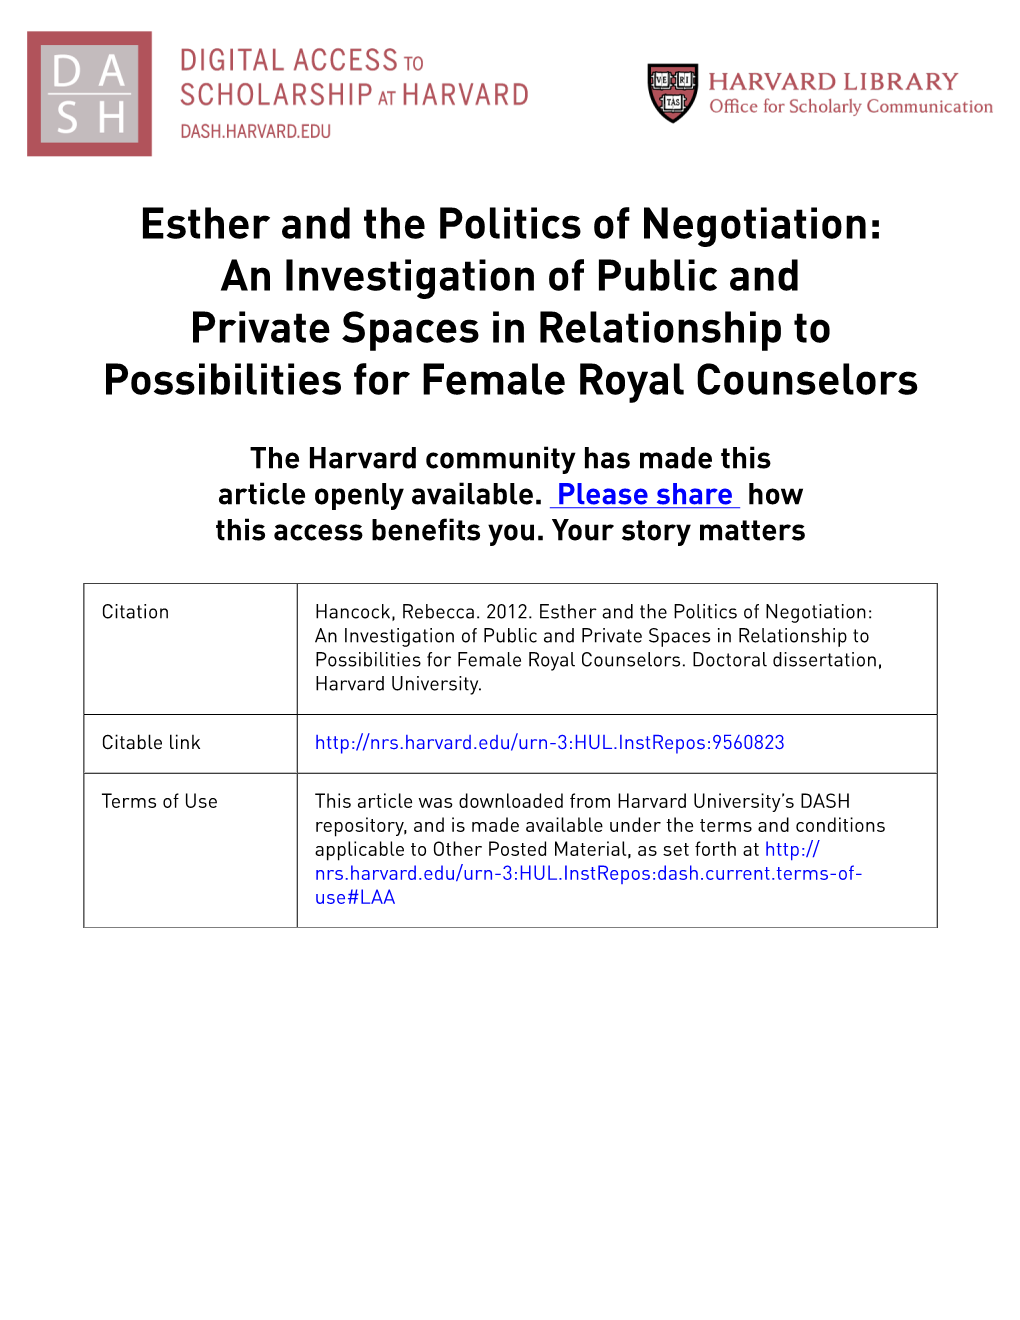 Esther and the Politics of Negotiation: an Investigation of Public and Private Spaces in Relationship to Possibilities for Female Royal Counselors